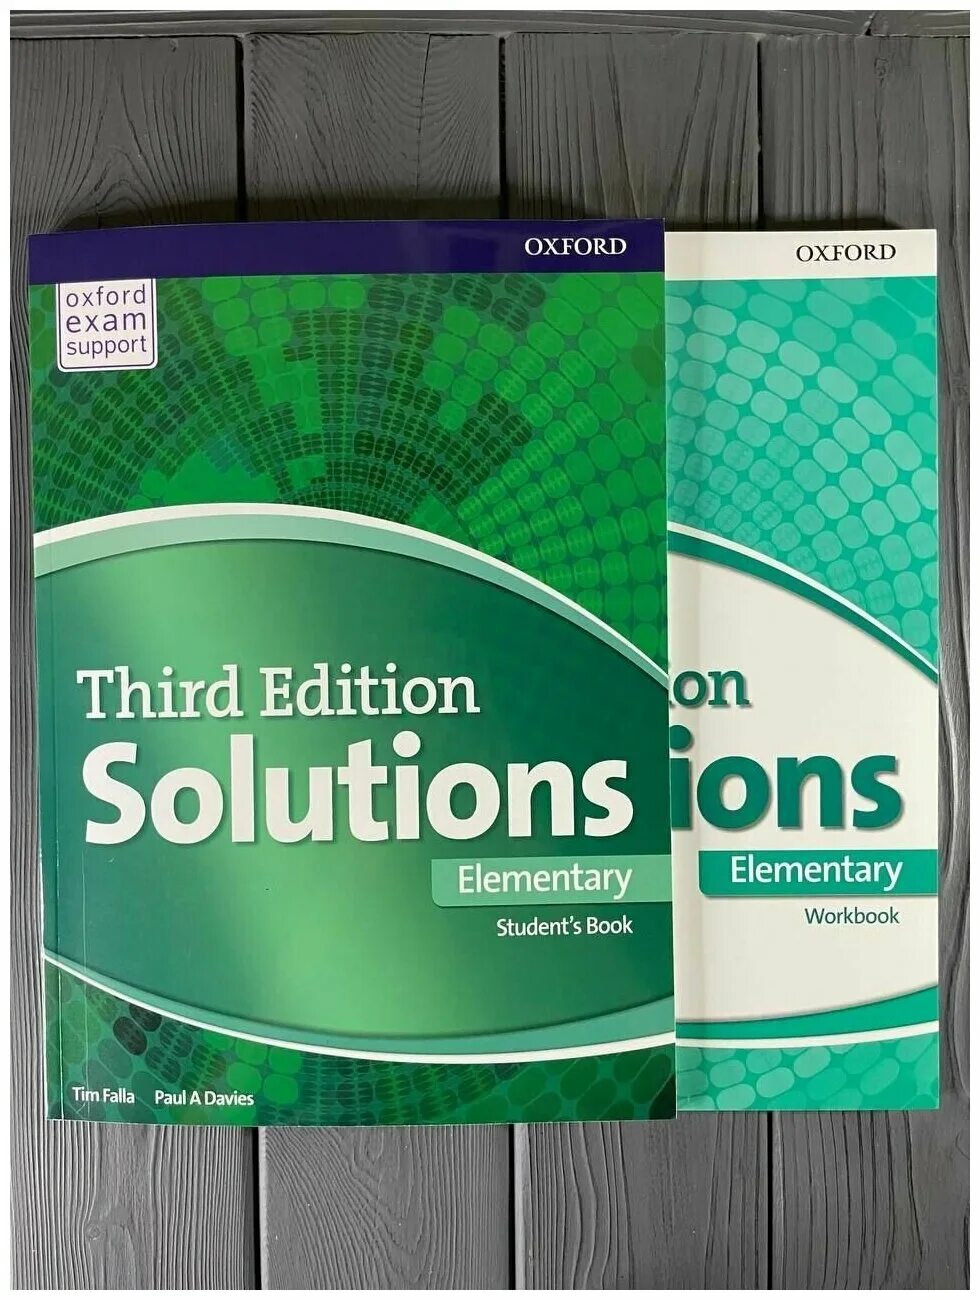 Solutions elementary. Solutions Elementary 3rd Edition. Учебник solutions Elementary 3 Edition. Oxford solutions Elementary. Solution Elementary students book 3 Edition.